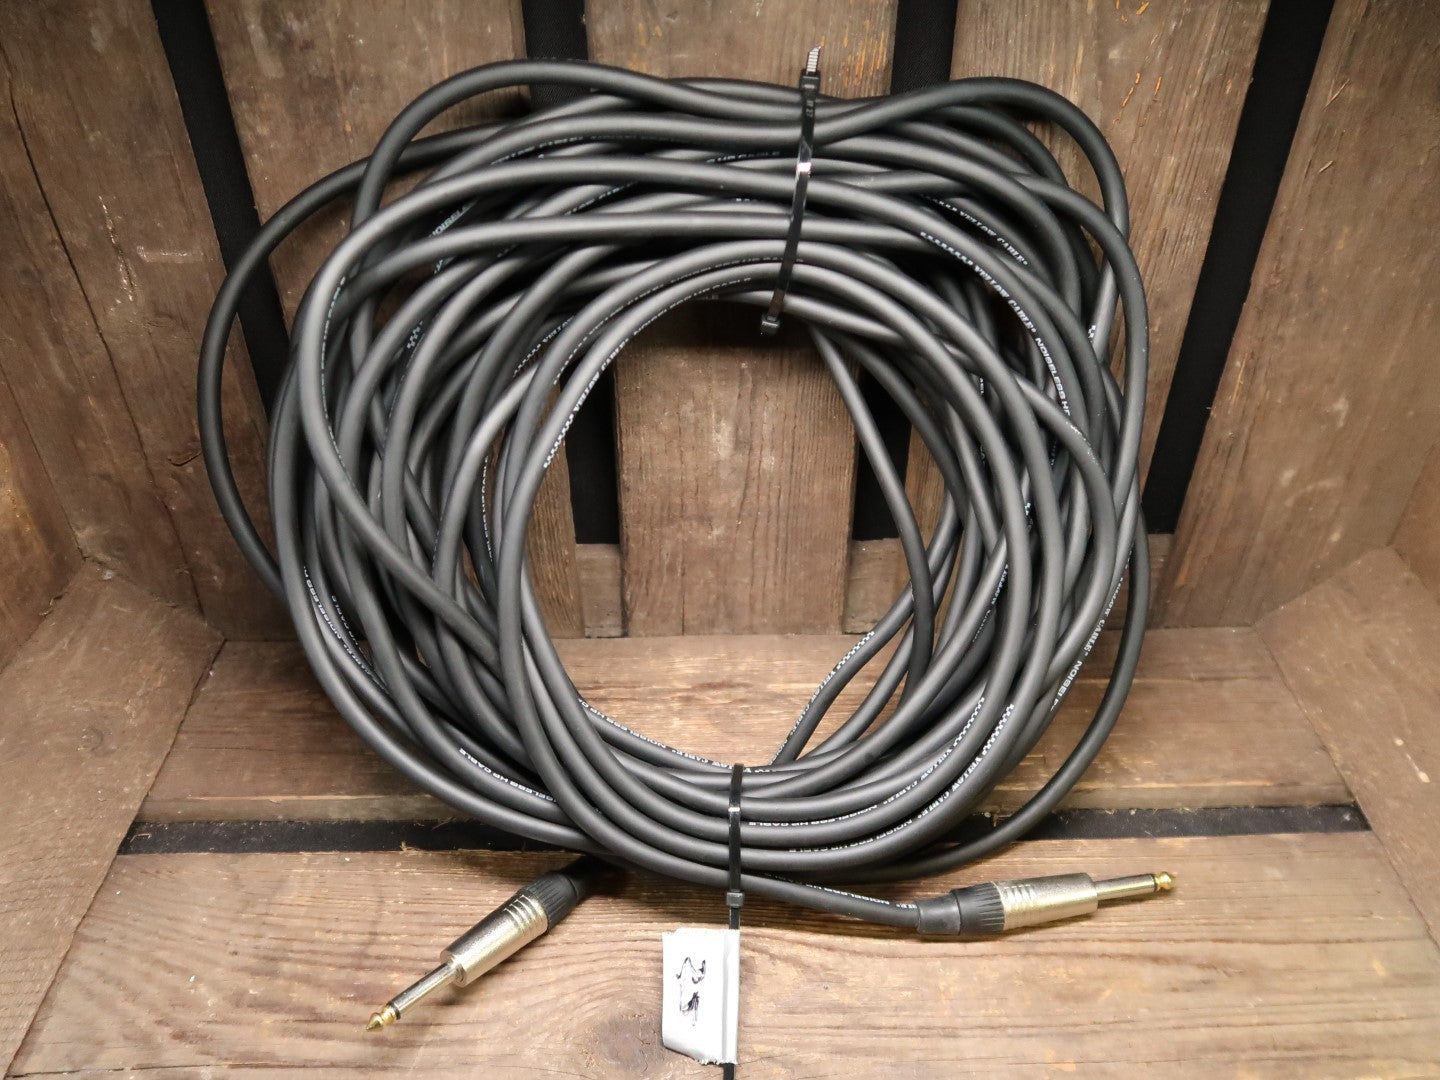 Instrument kabel 25m (yellow cable)